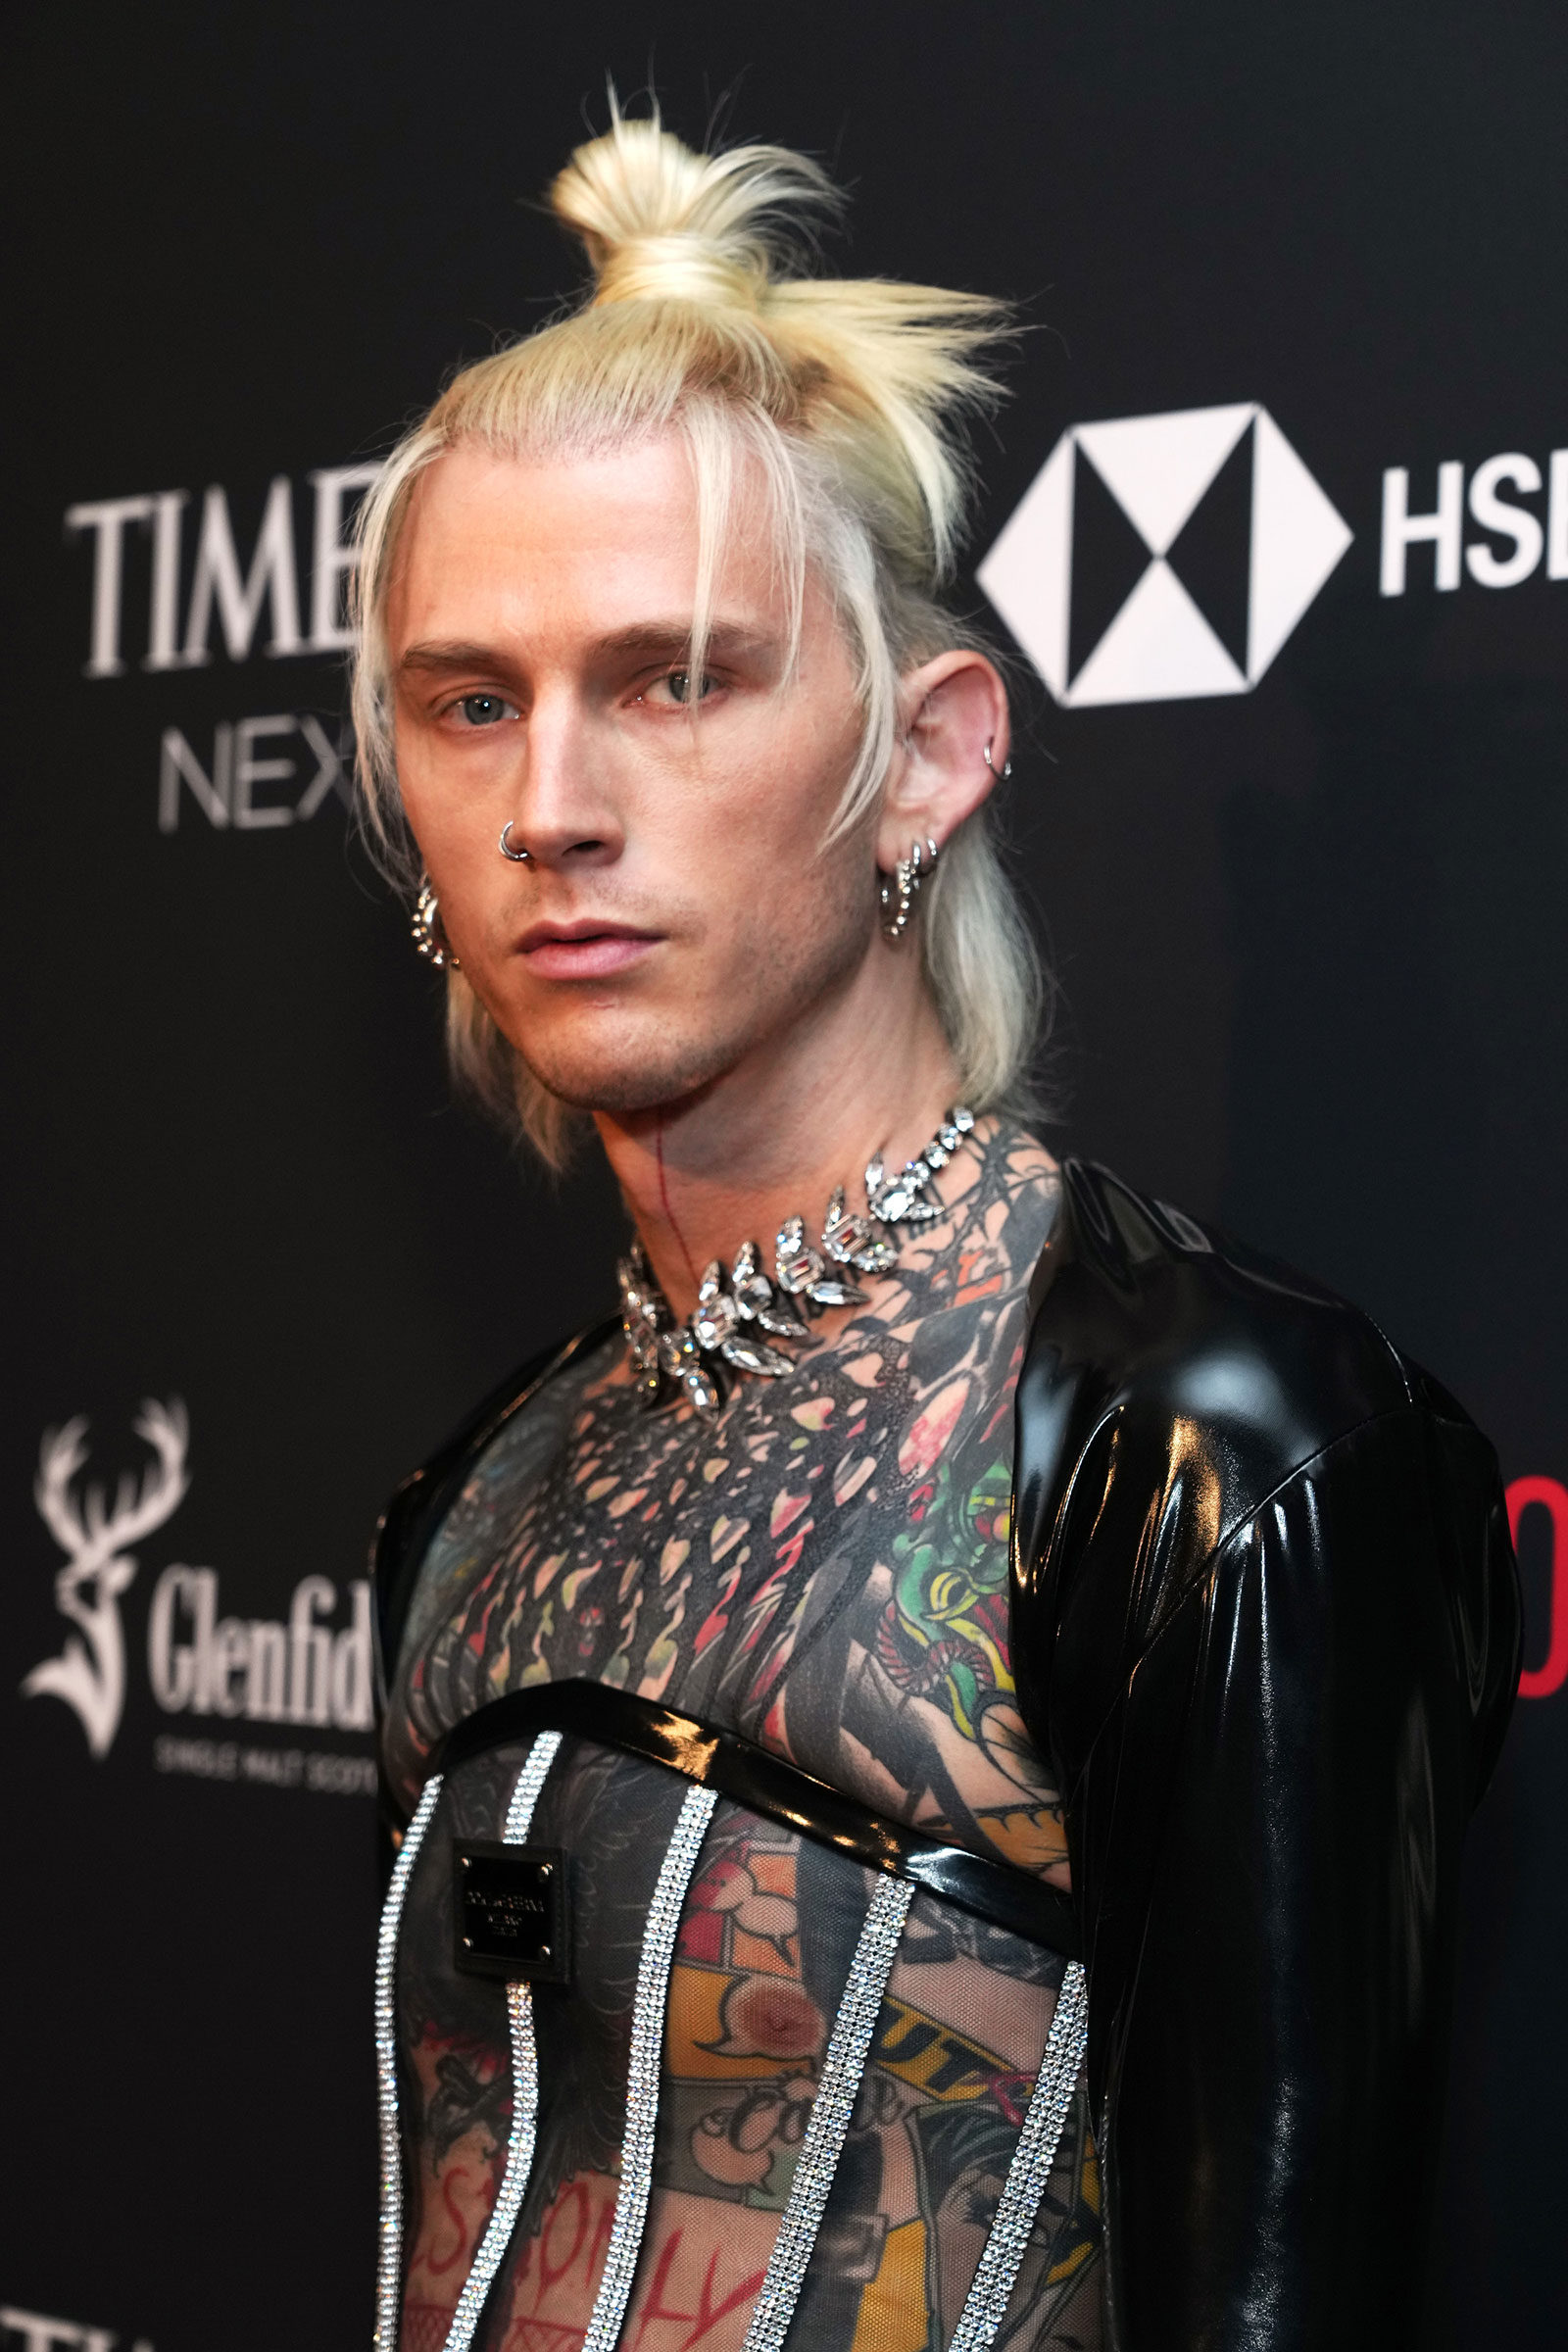 Musician Machine Gun Kelly attends the TIME100 Next Gala in New York City on Oct. 25, 2022. (Kevin Mazur—Getty Images for TIME)